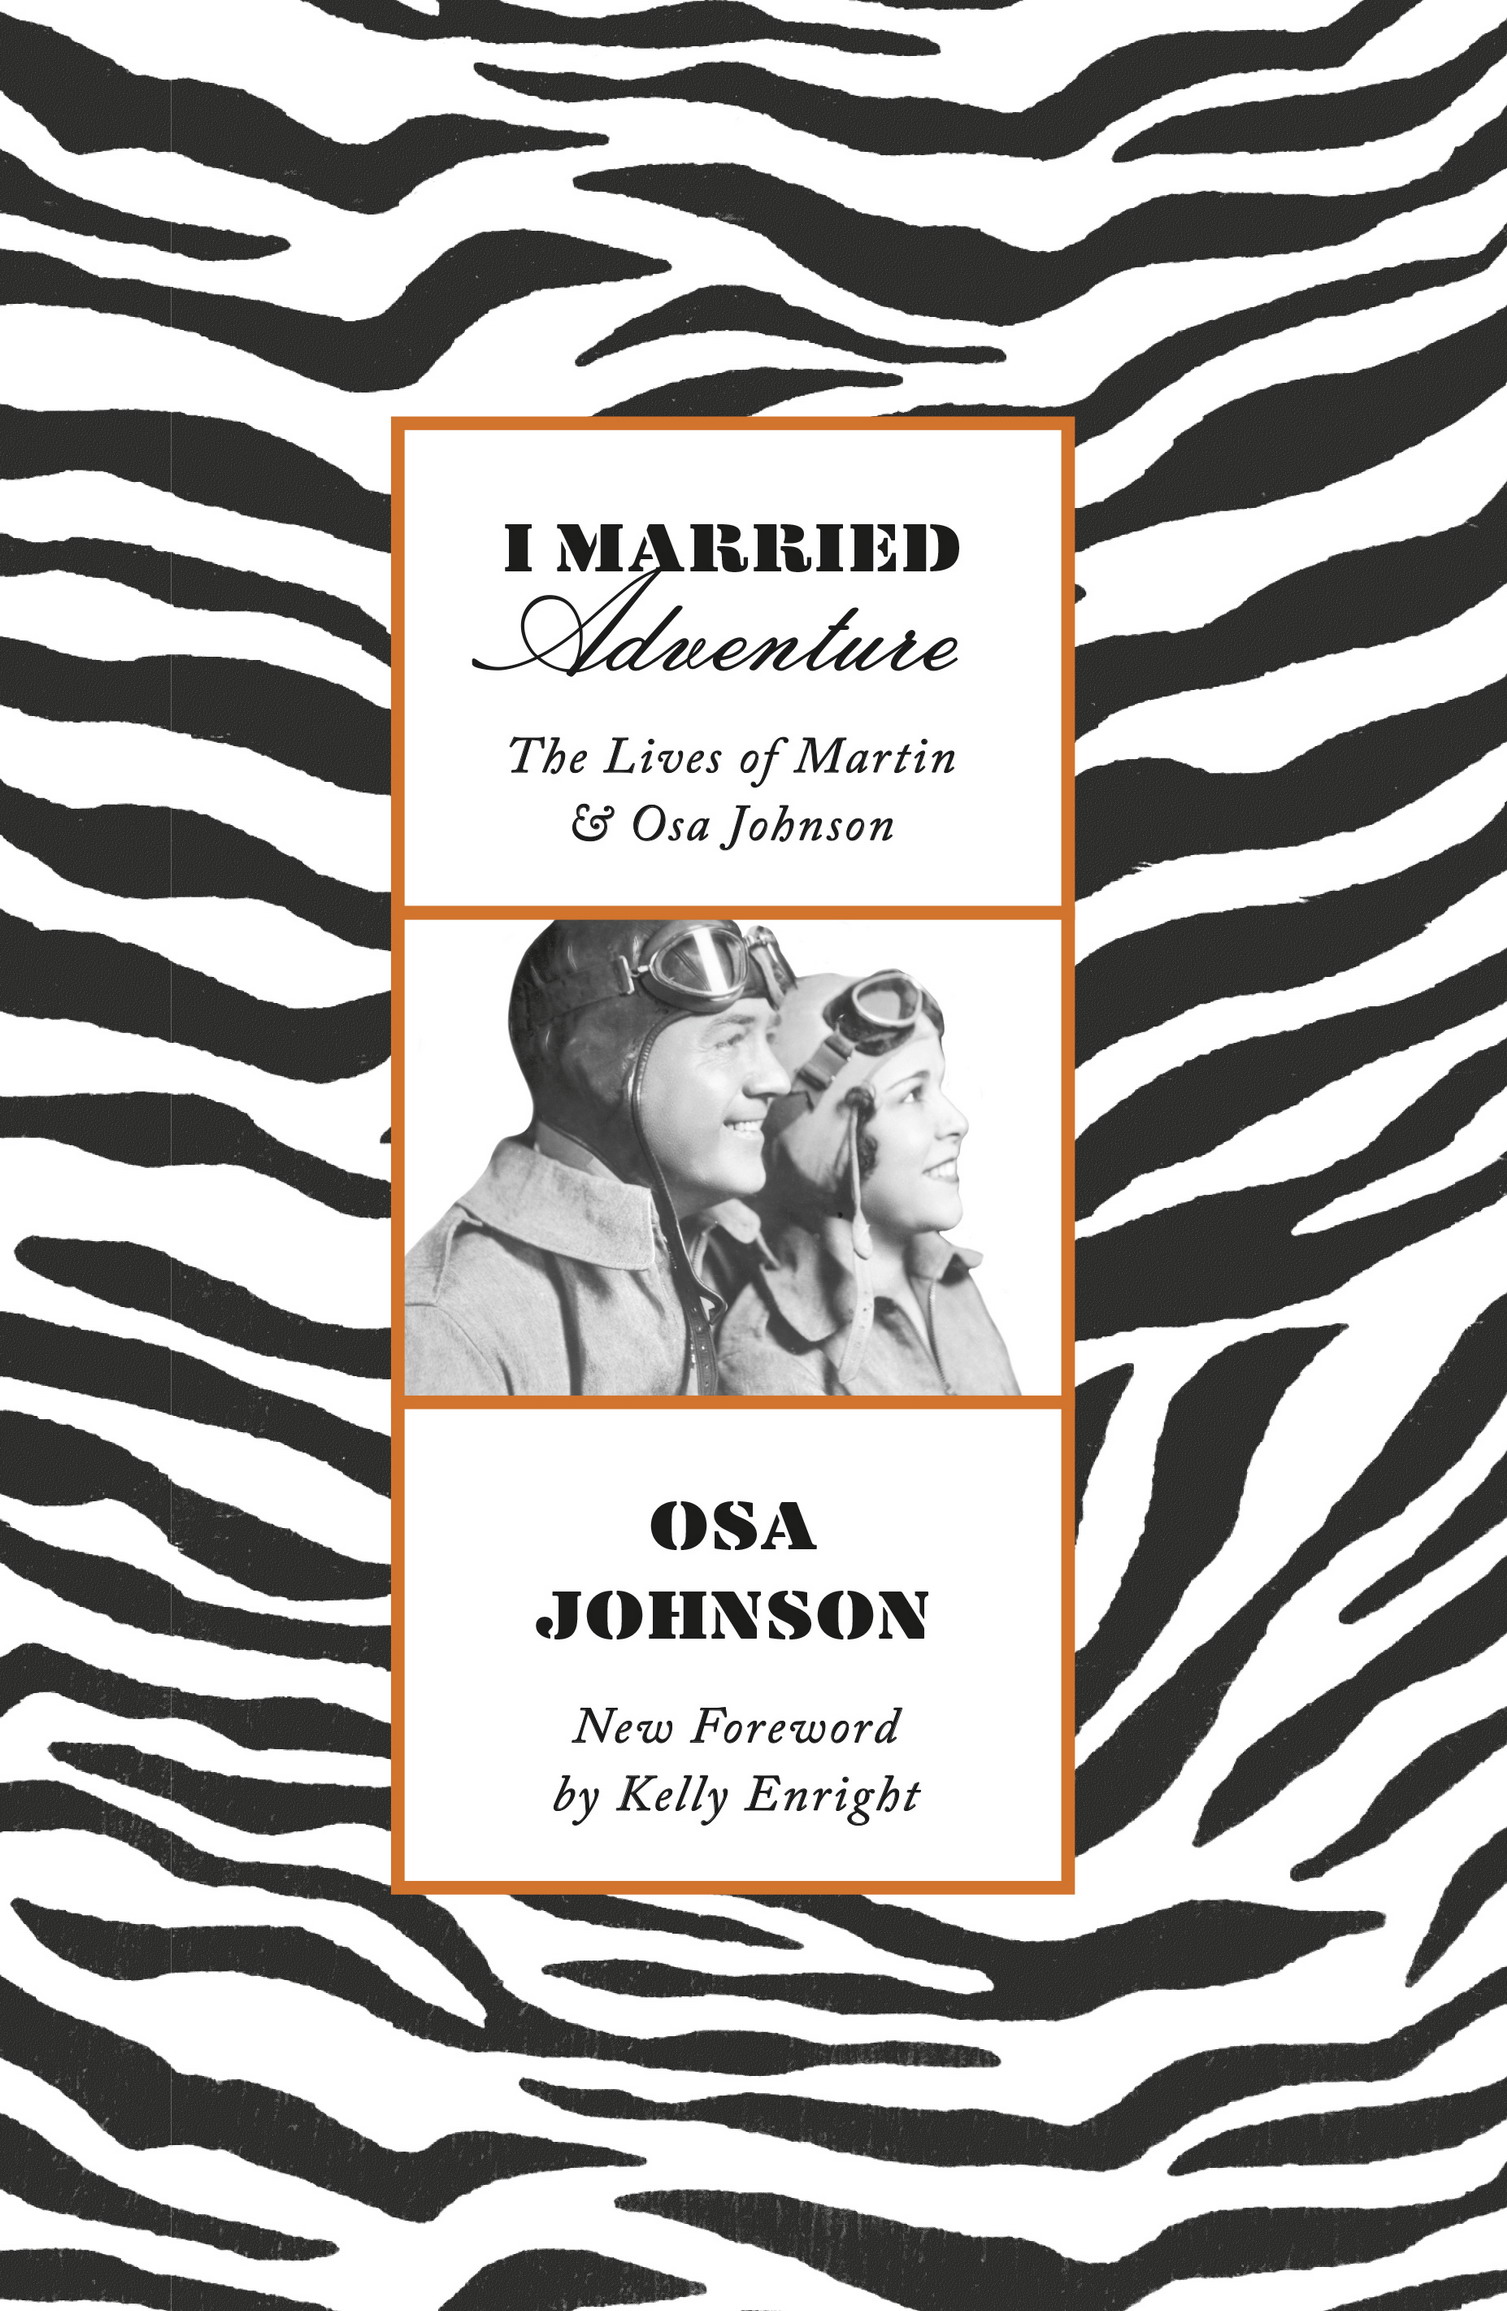 Why I Married Adventure Became a Worldwide Bestseller in 1940 A pleasant - photo 1